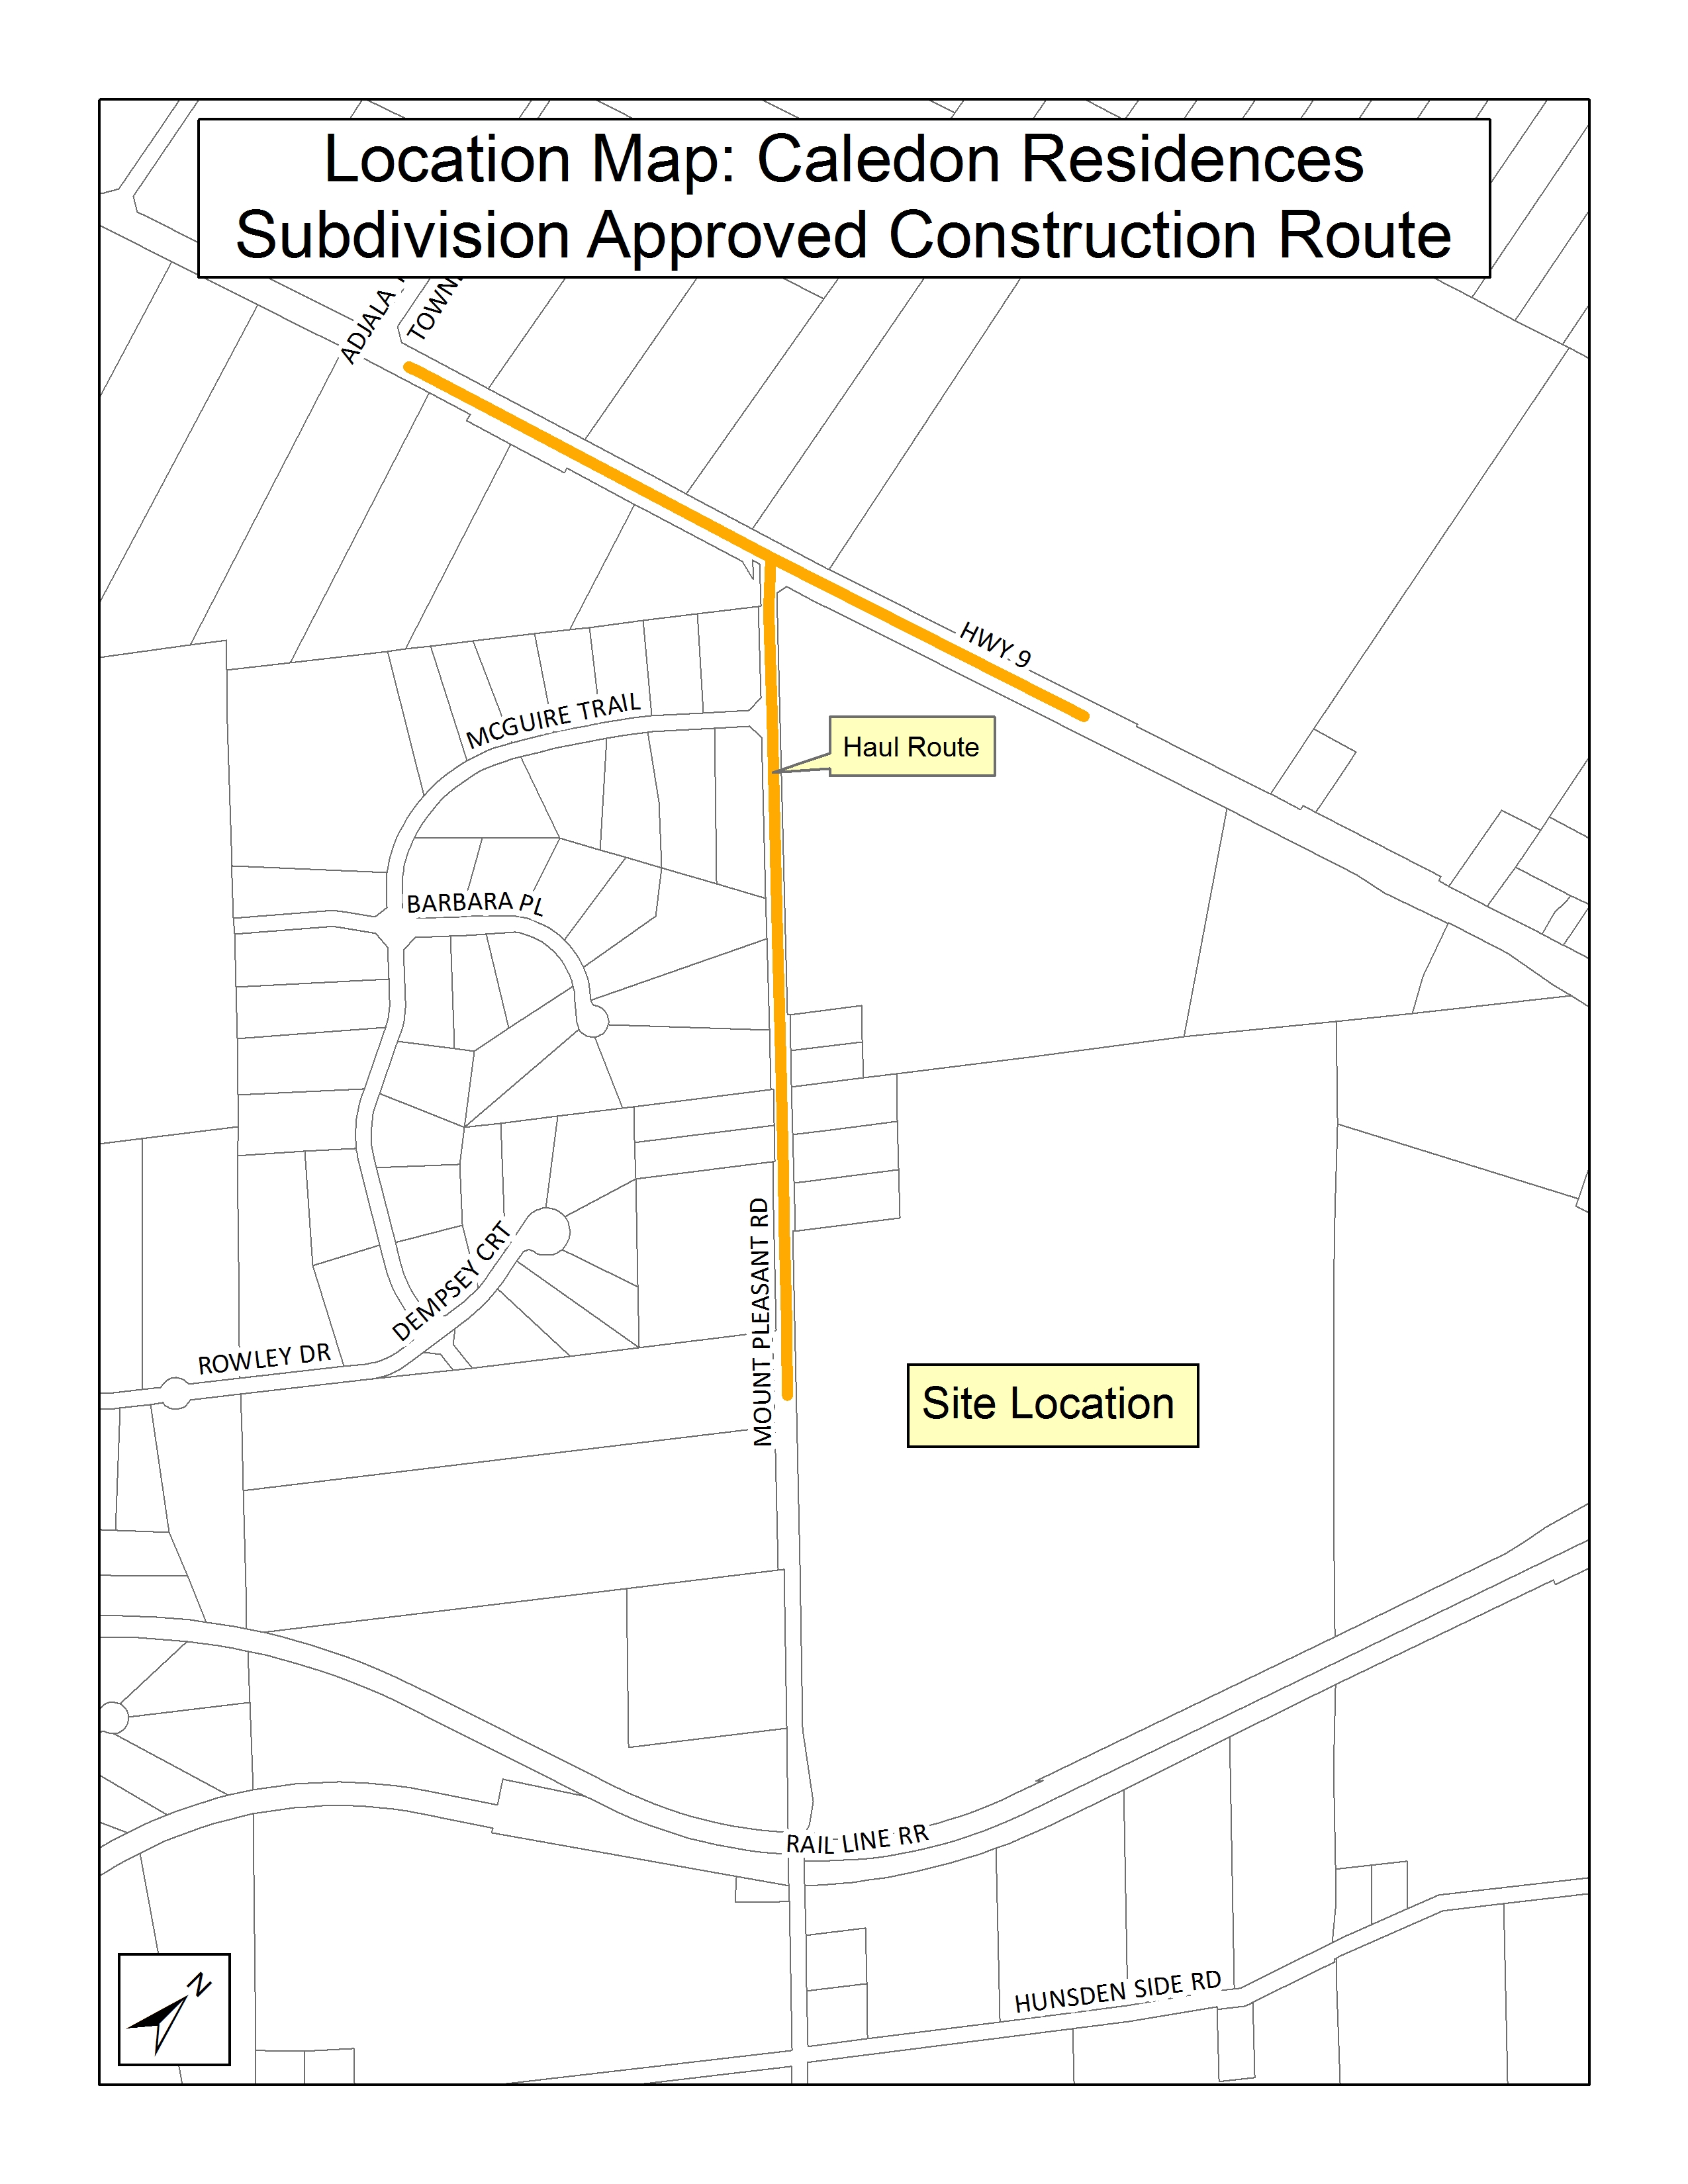 New Subdivision – Construction Route